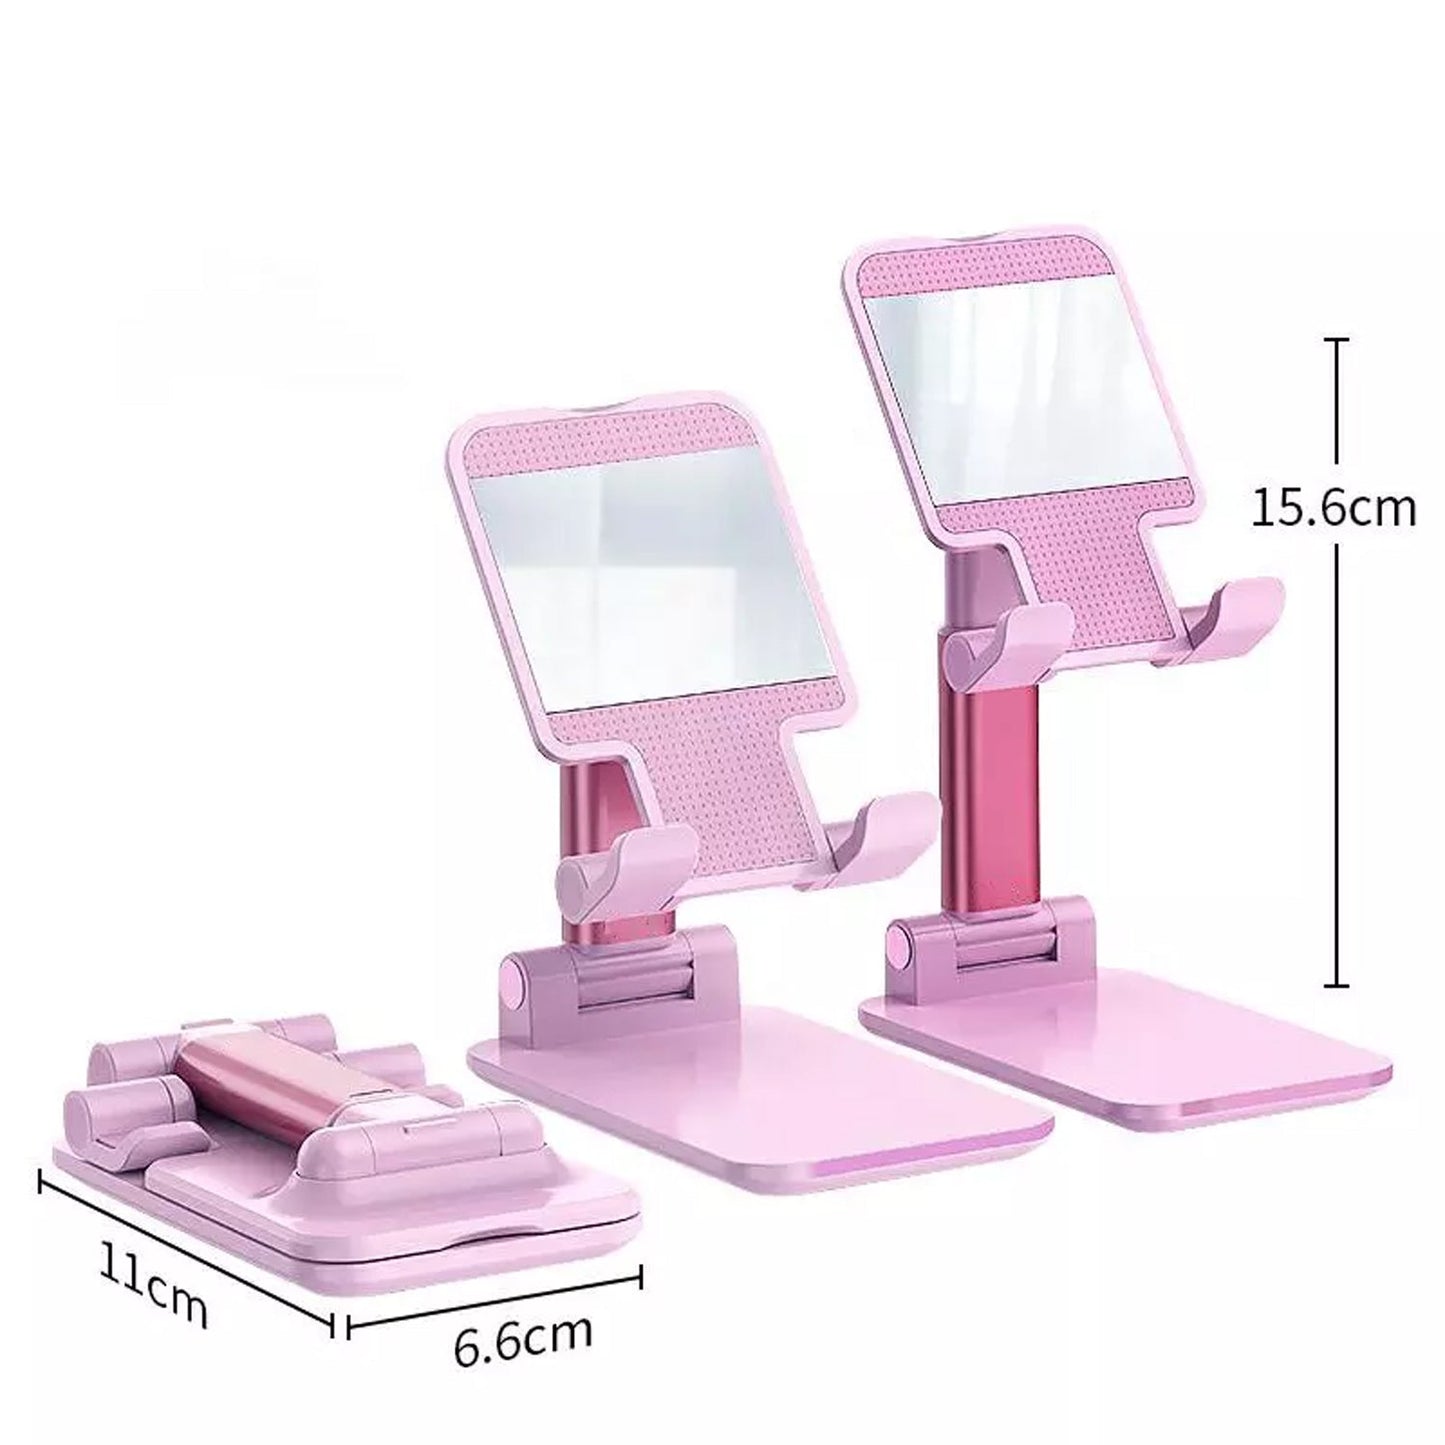 Desktop Cell Phone Stand with mirror Full 3-Way Adjustable Phone Stand for Desk Height + Angles